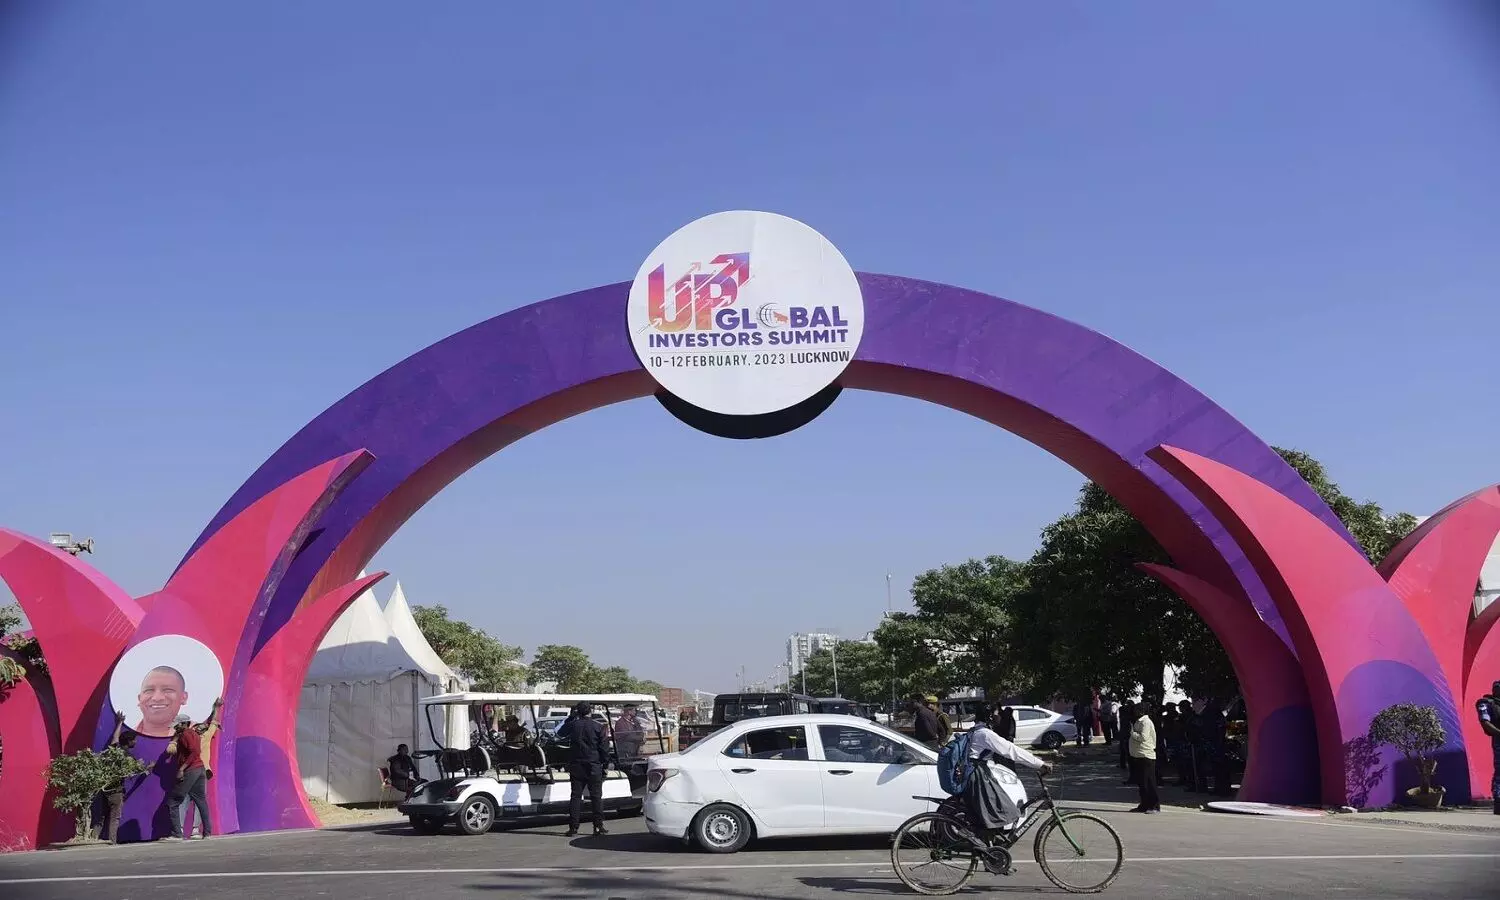 UP Global Investors Summit 2023 in Lucknow